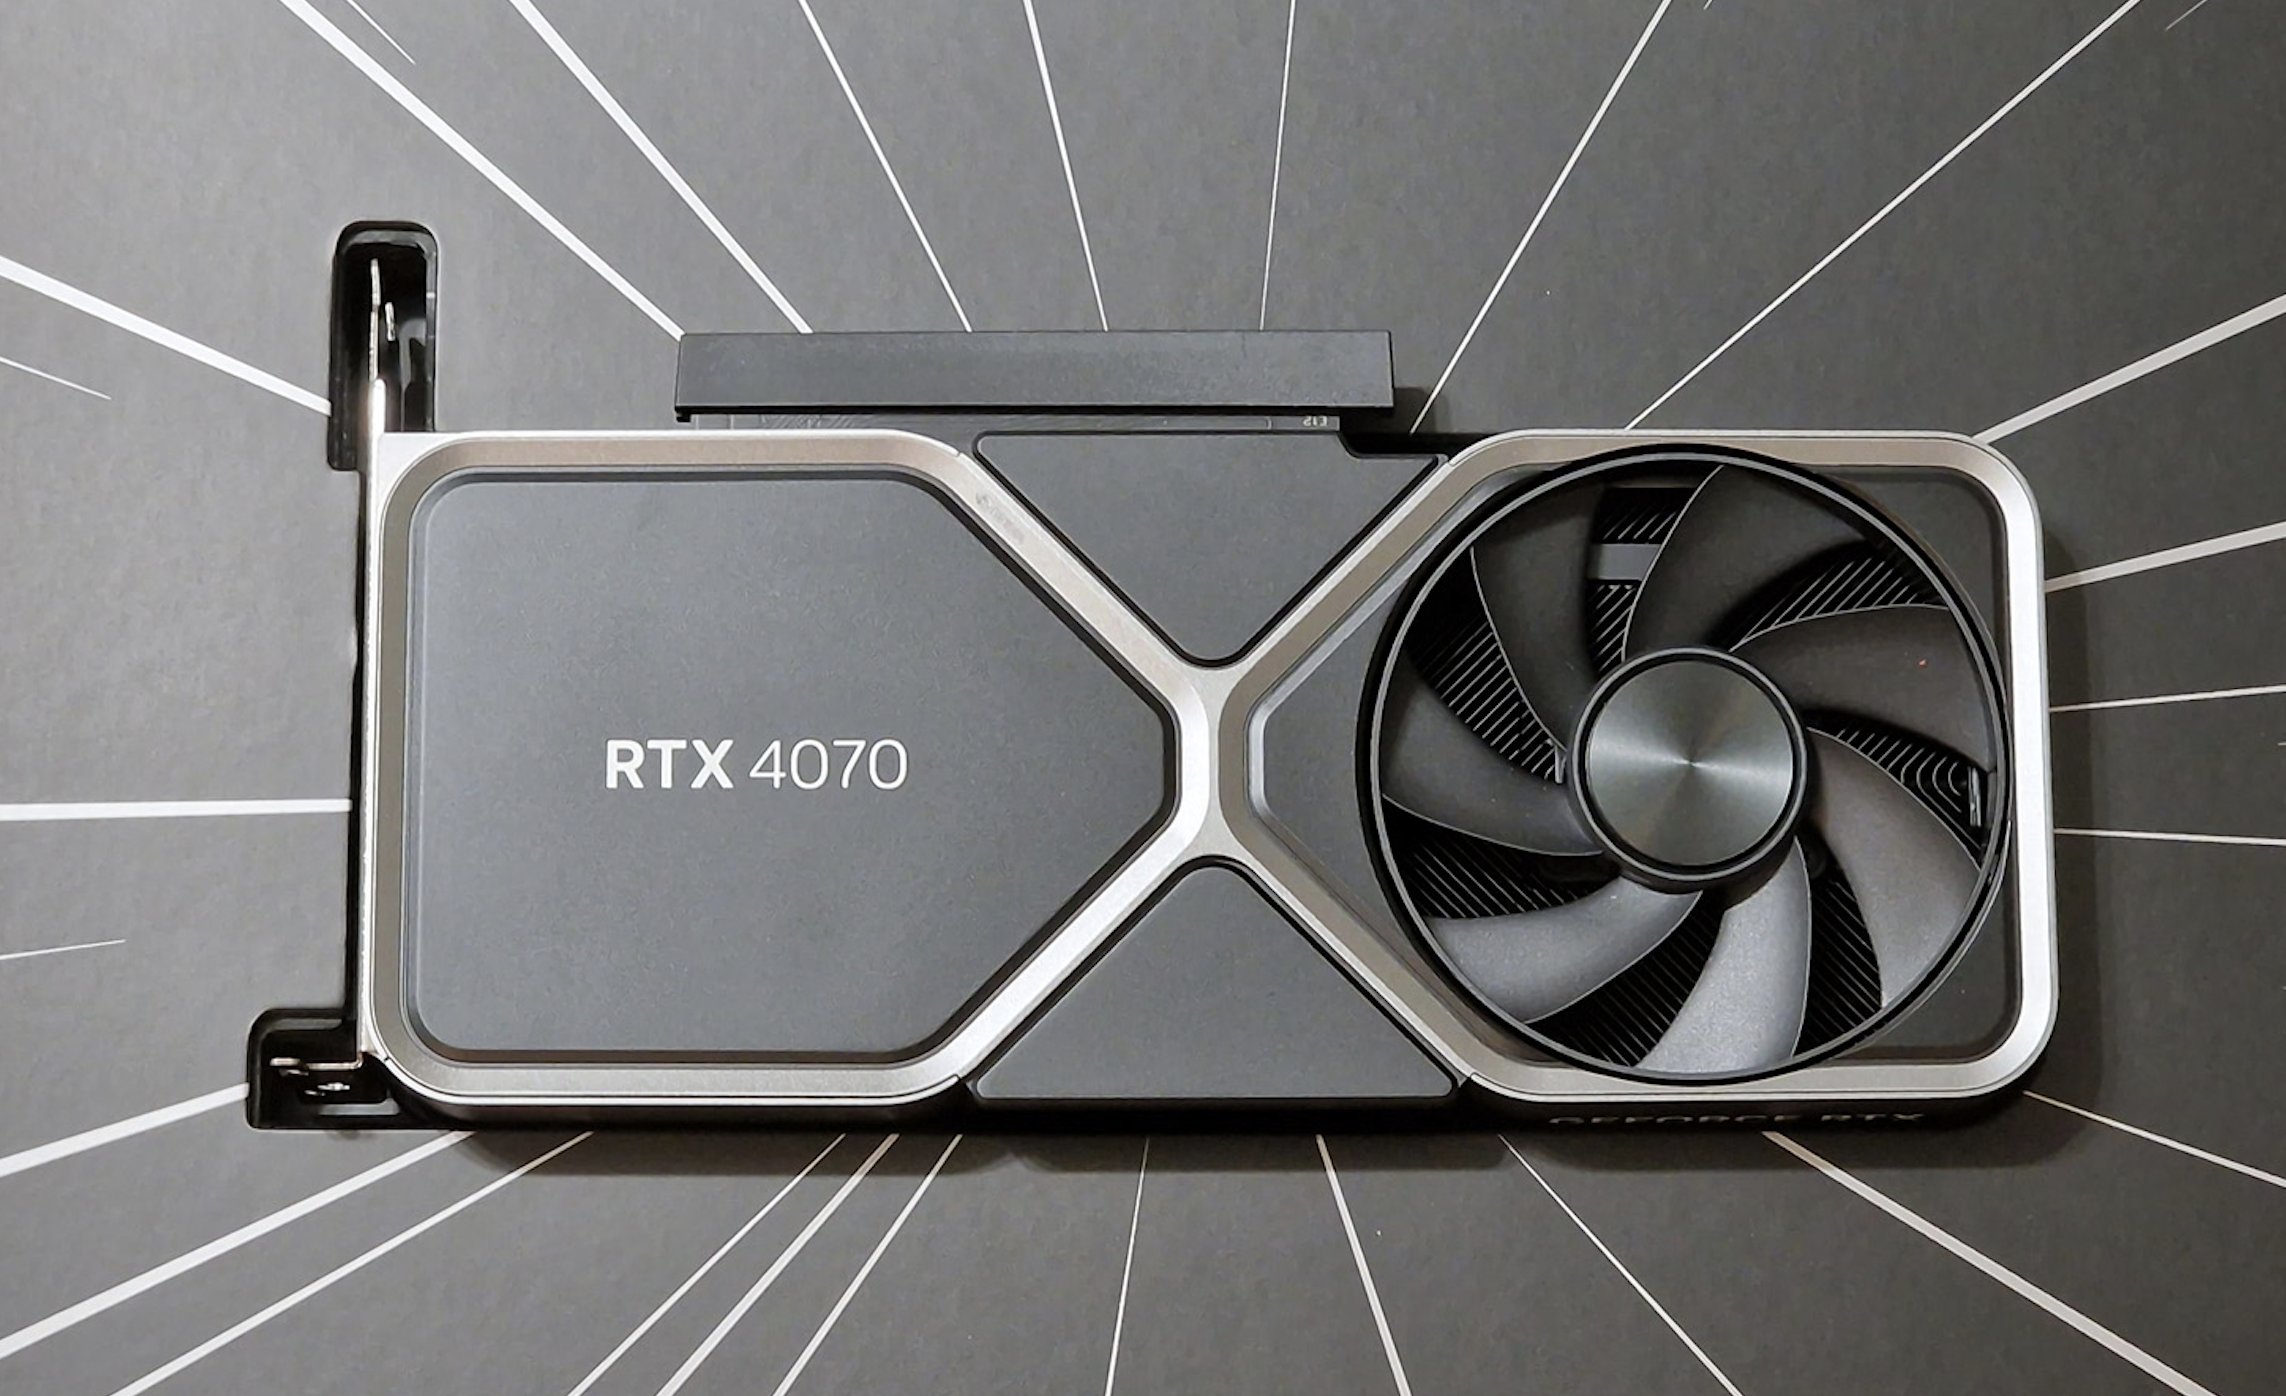 NVIDIA GeForce RTX 4070 Founder Edition Pictured